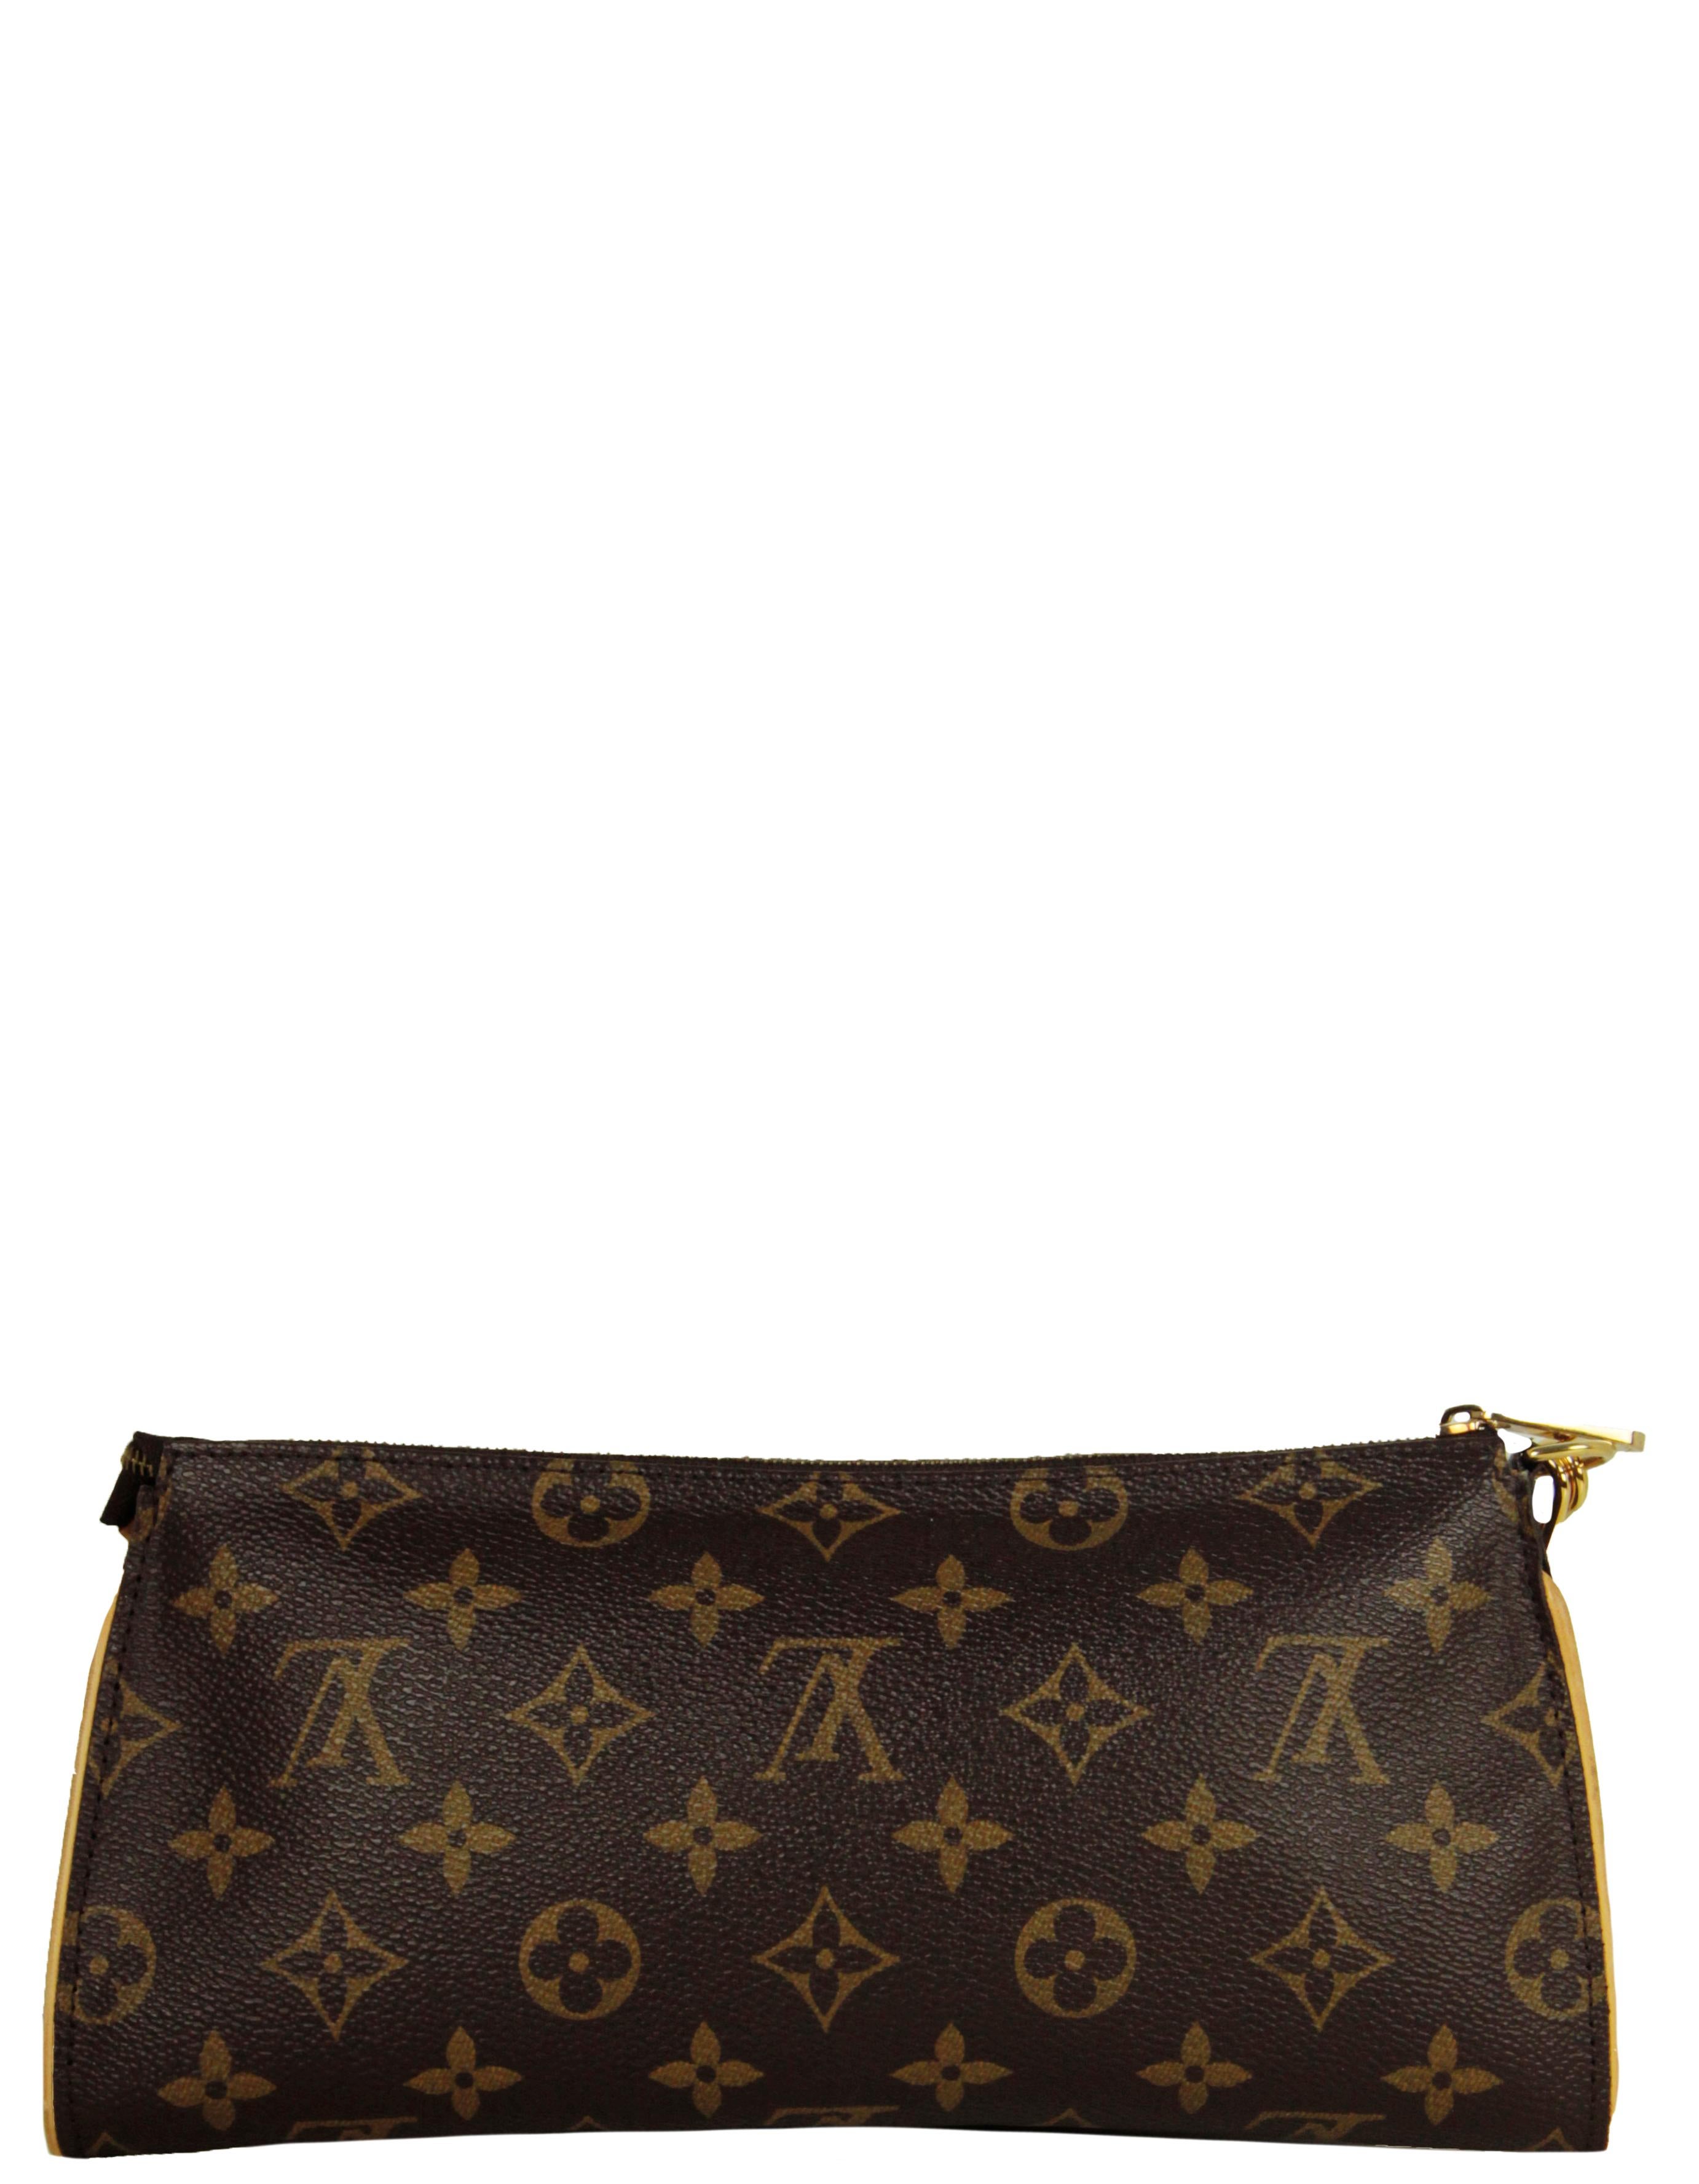 Louis Vuitton Monogram Eva Clutch Crossbody Bag In Excellent Condition For Sale In New York, NY